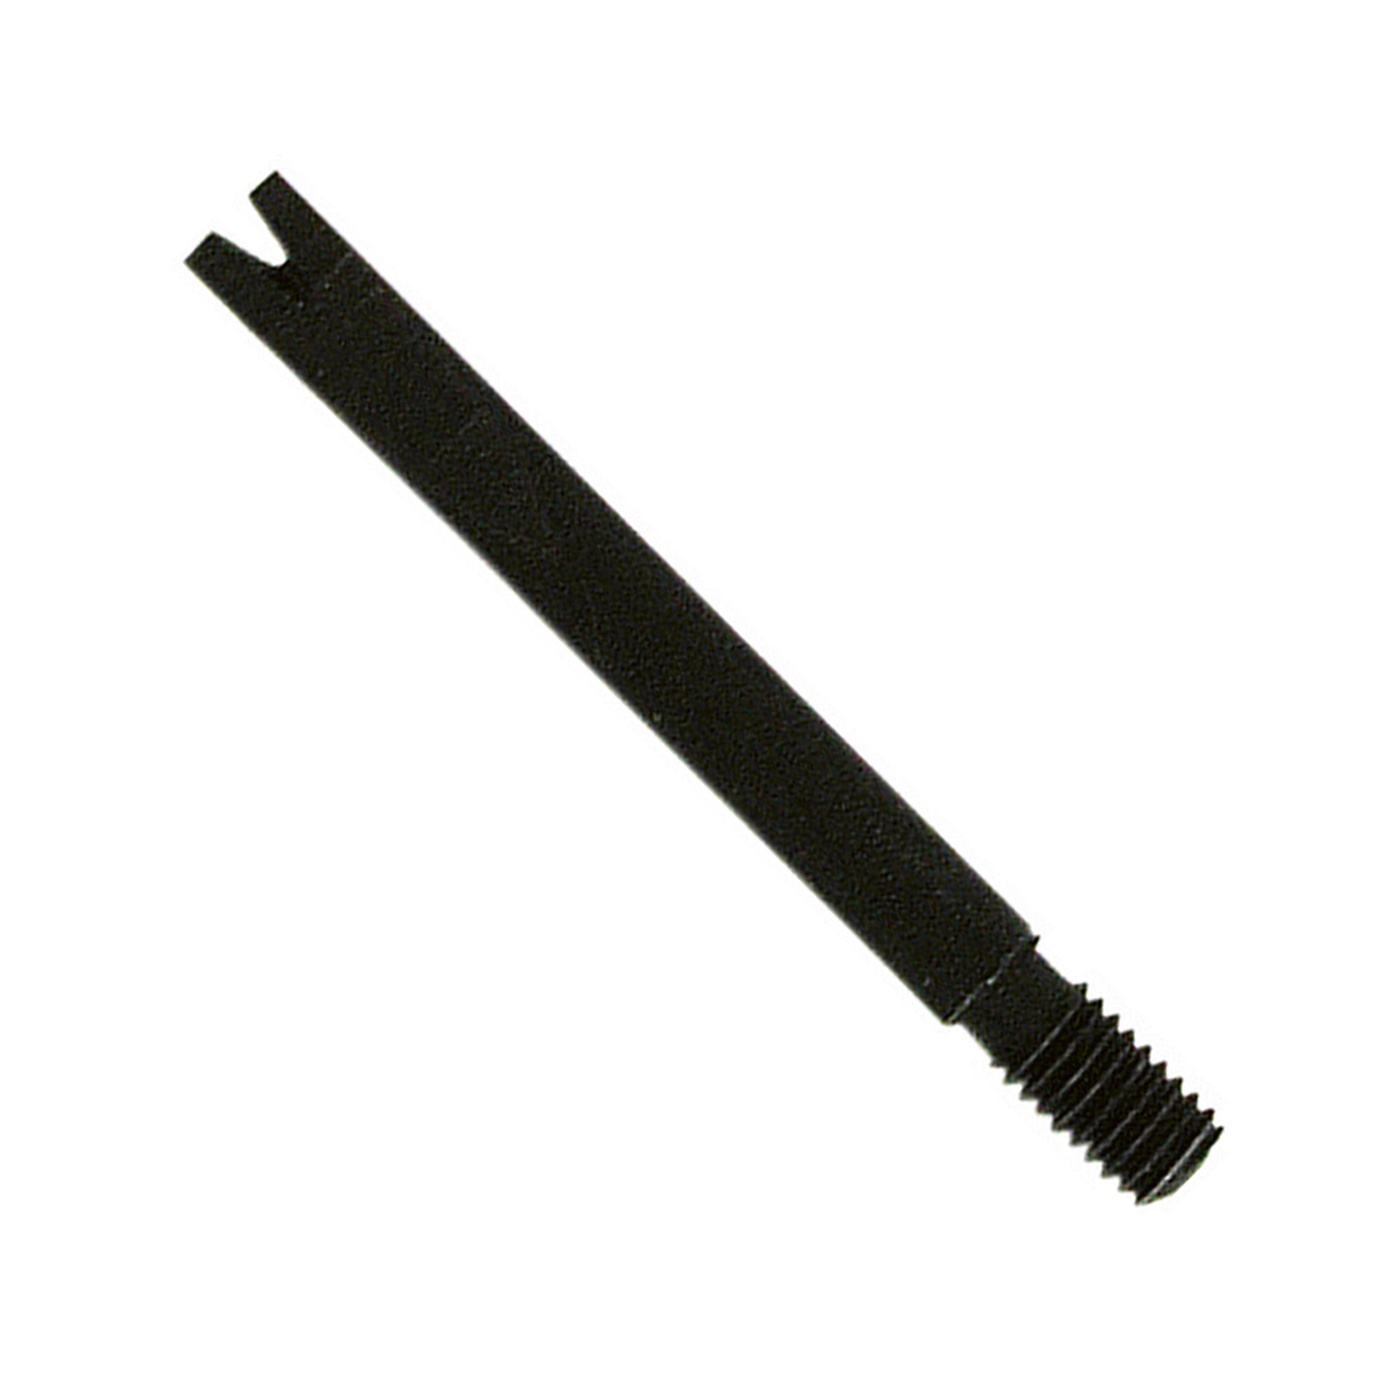 Spare Insert, Fork-Shaped, for Spring Bar Tool - 1 piece